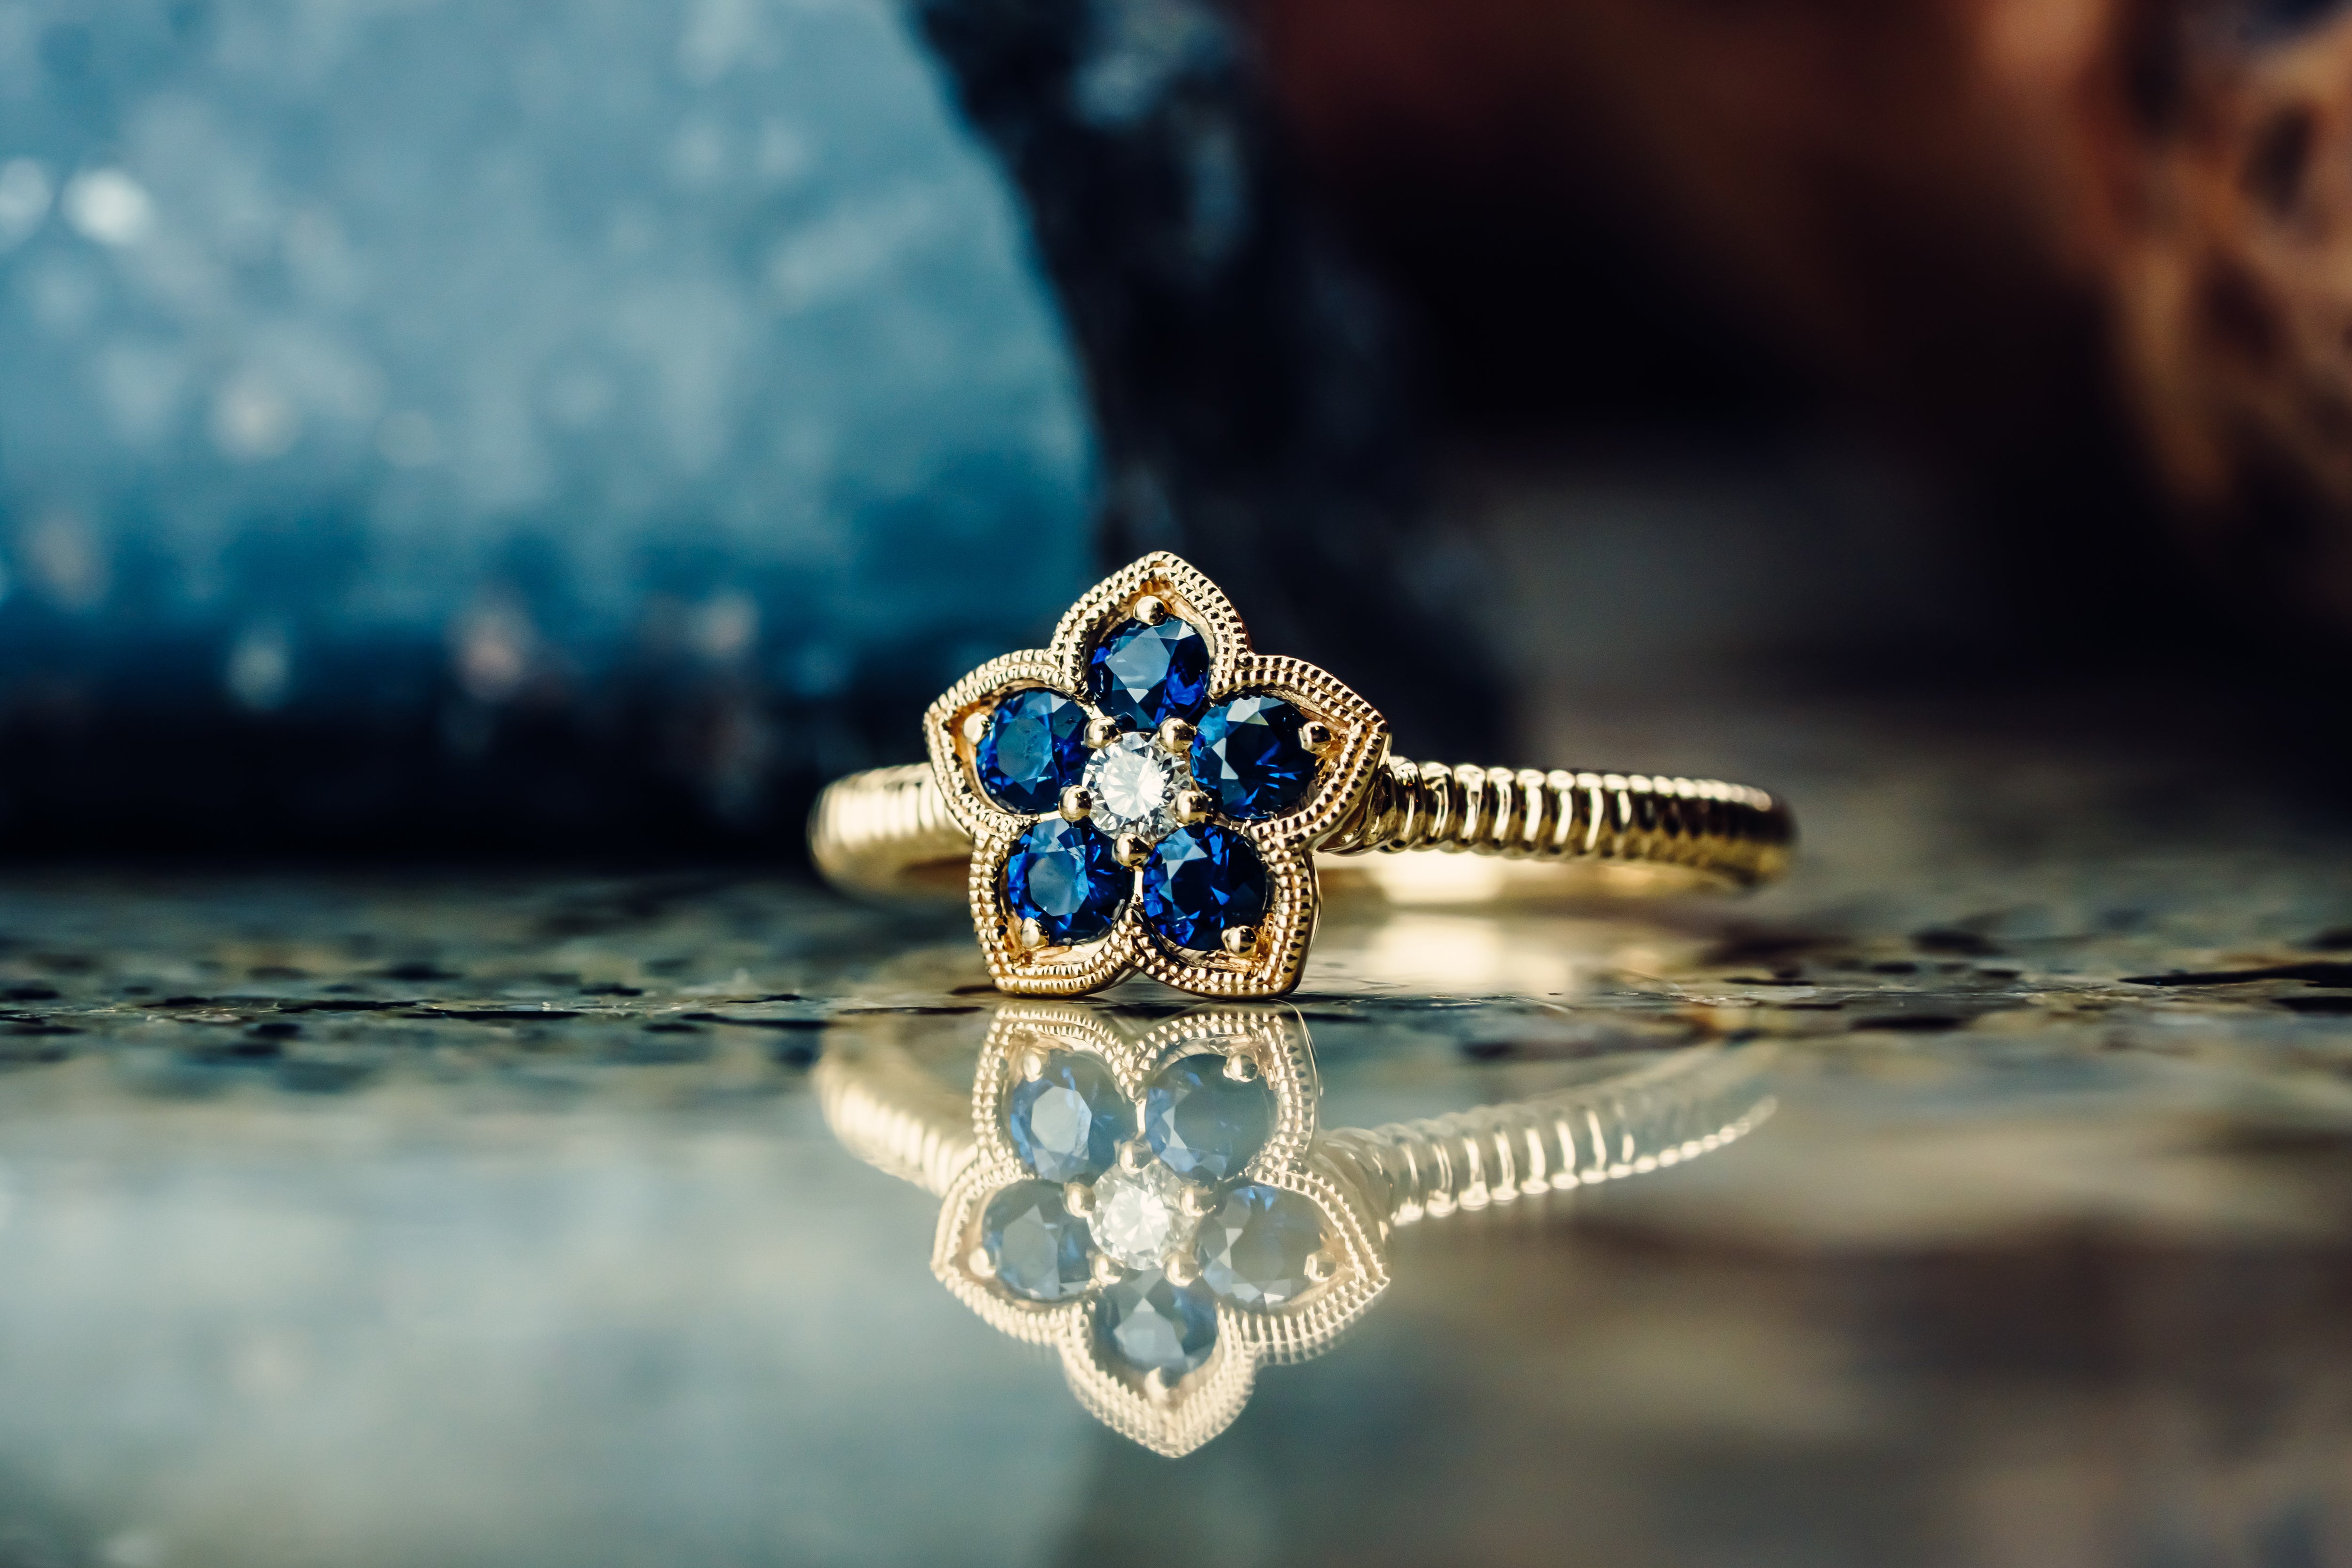 Flower Engagement Ring With Sapphire & Diamonds, 14k or 18k Solid Gold 